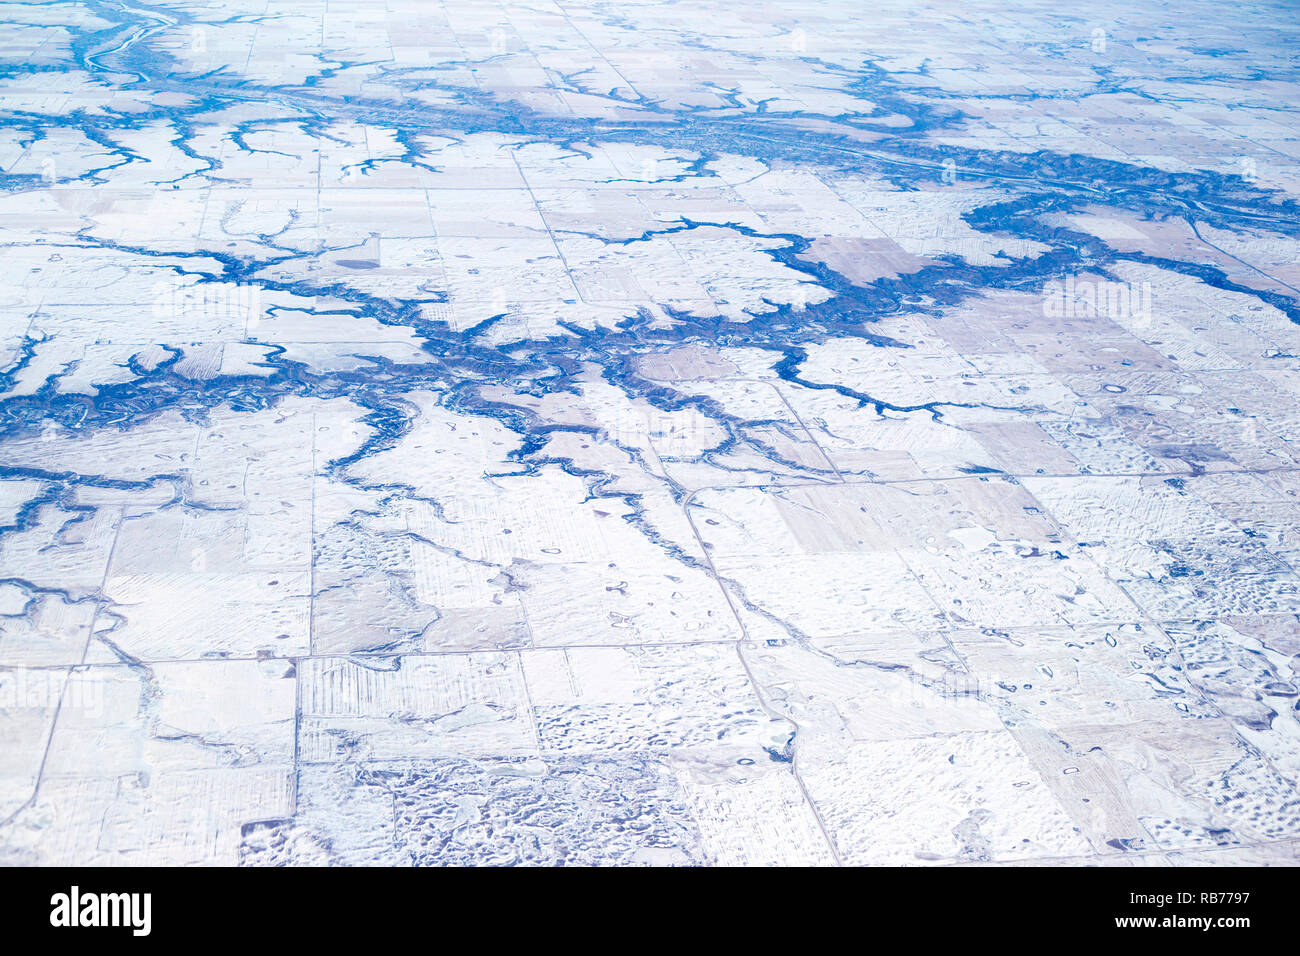 Dendritic river drainage pattern in prairie agricultural landscape, aerial view of the Red Deer River and tributaries near Drumheller, Alberta, Canada Stock Photo